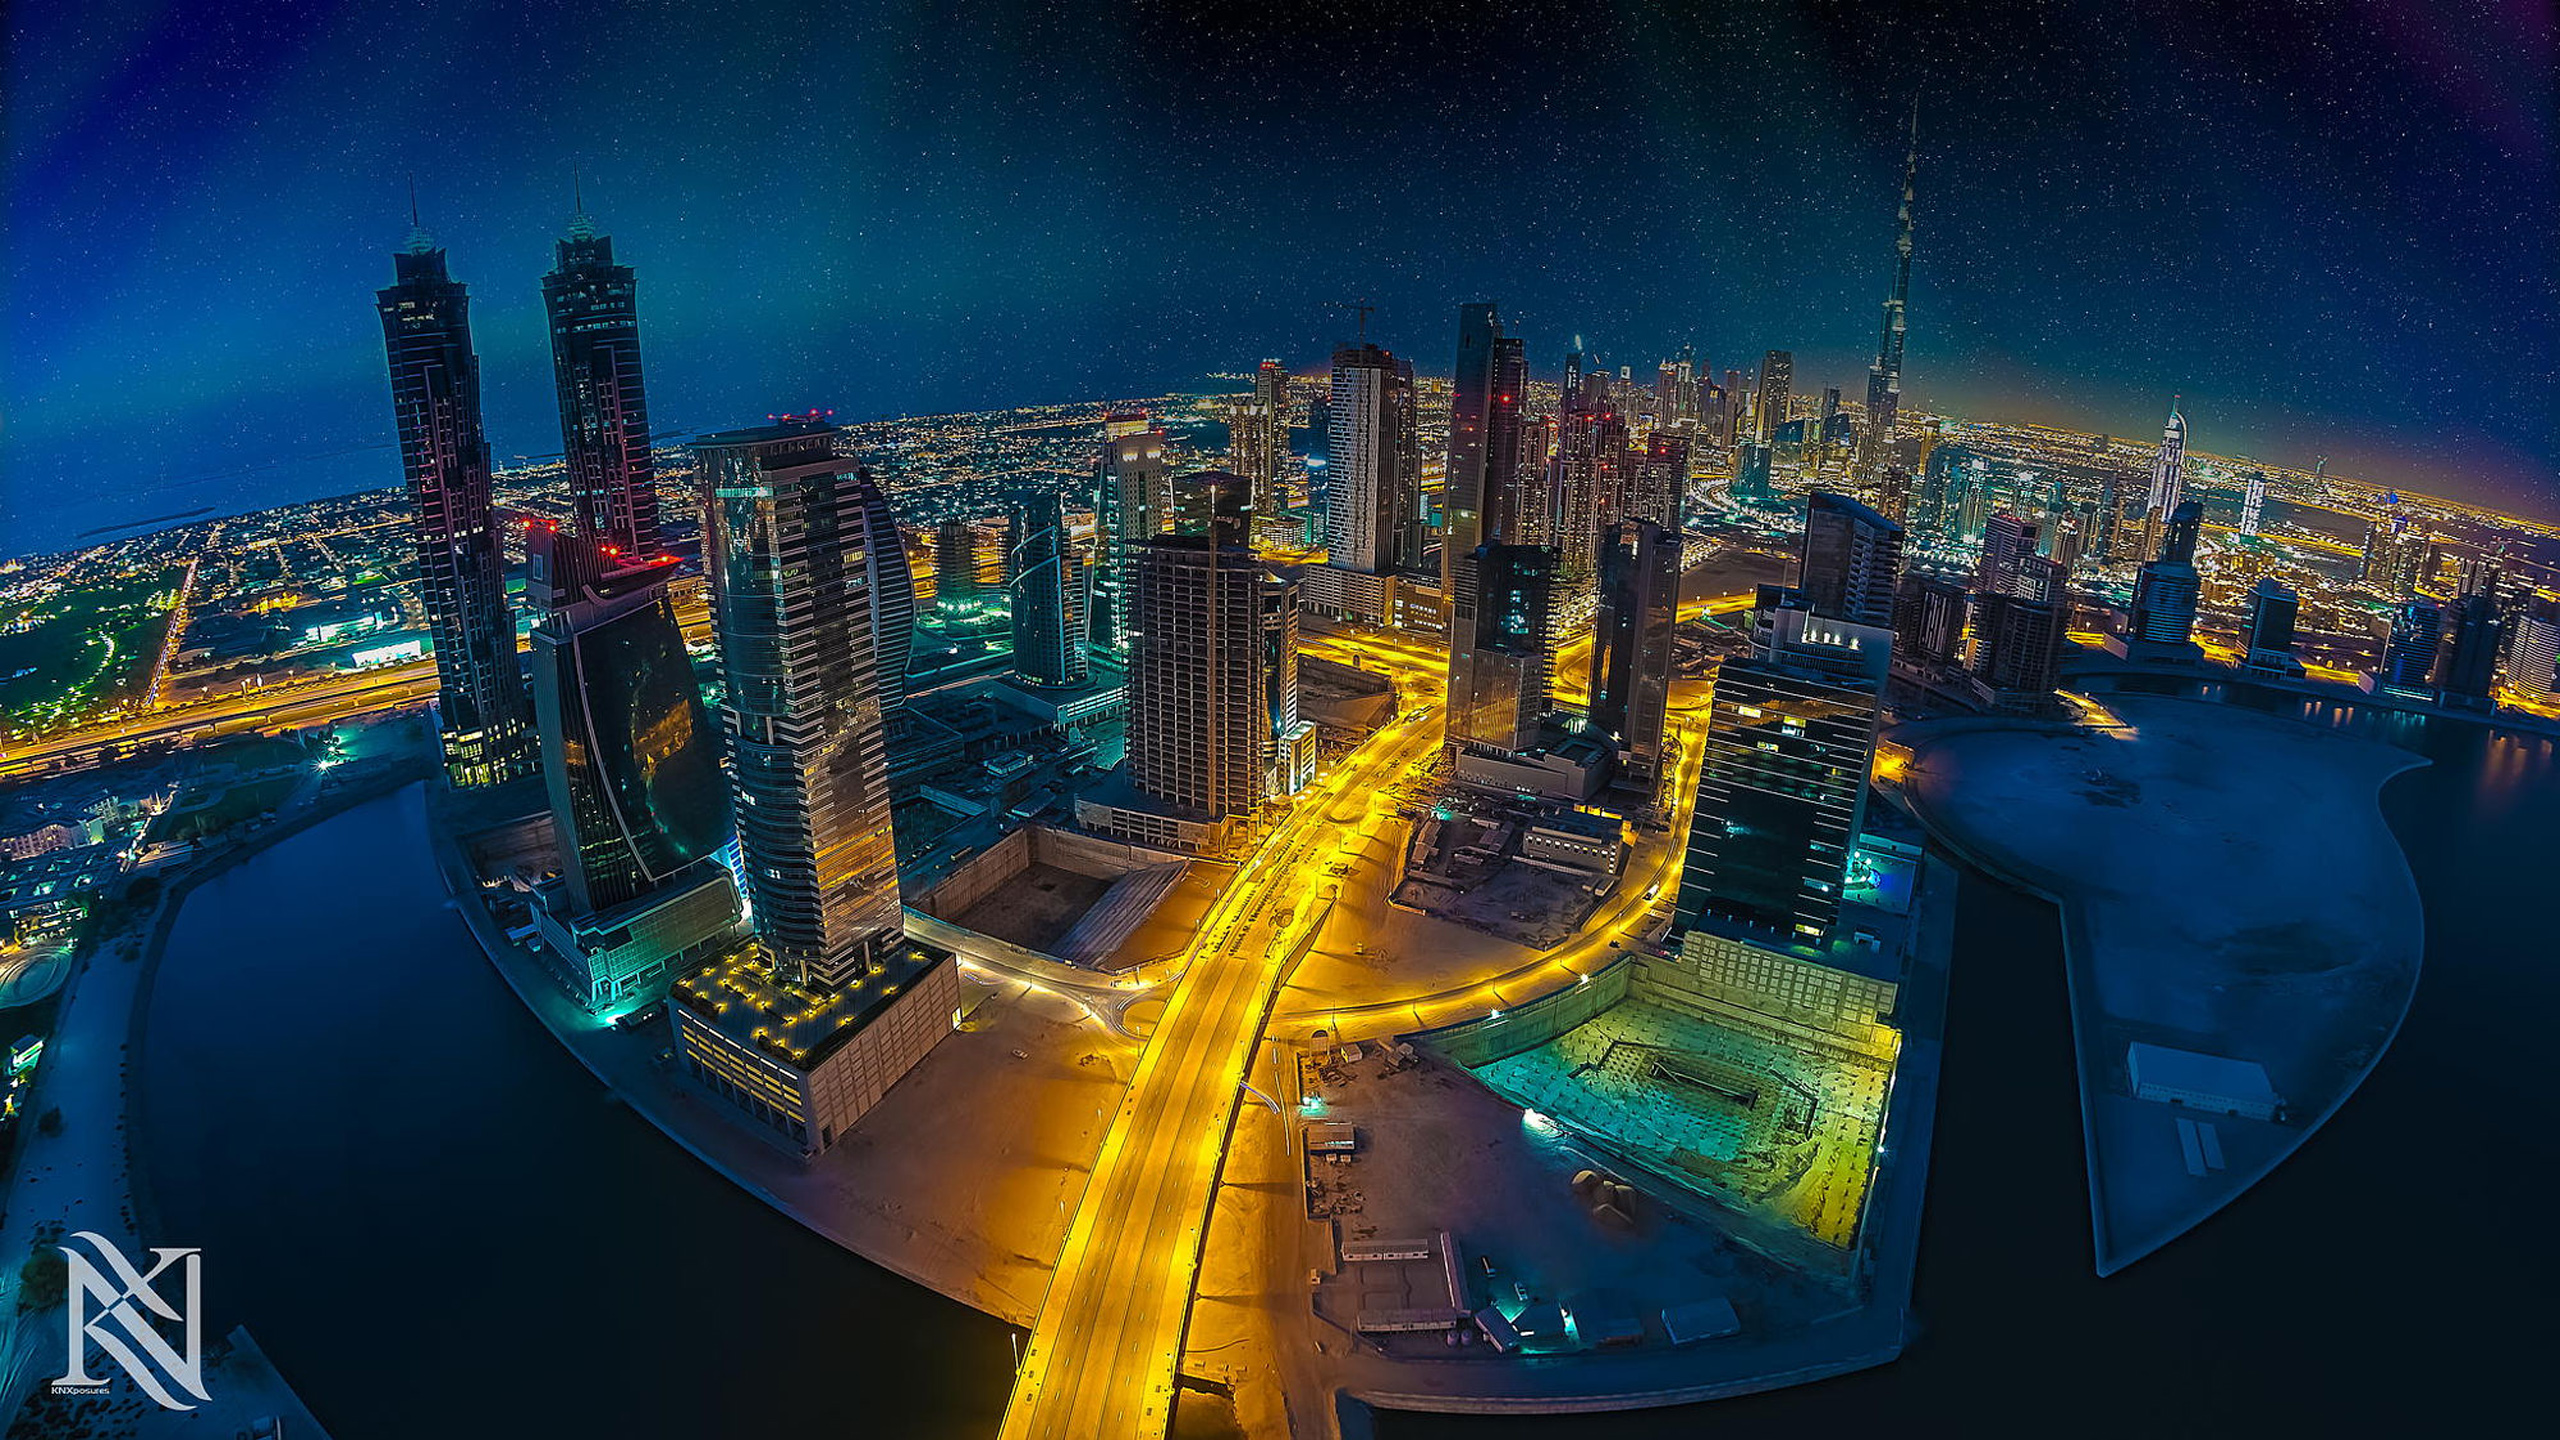 Dubai Skyline Aerial Images Of Cities With Modern Architecture